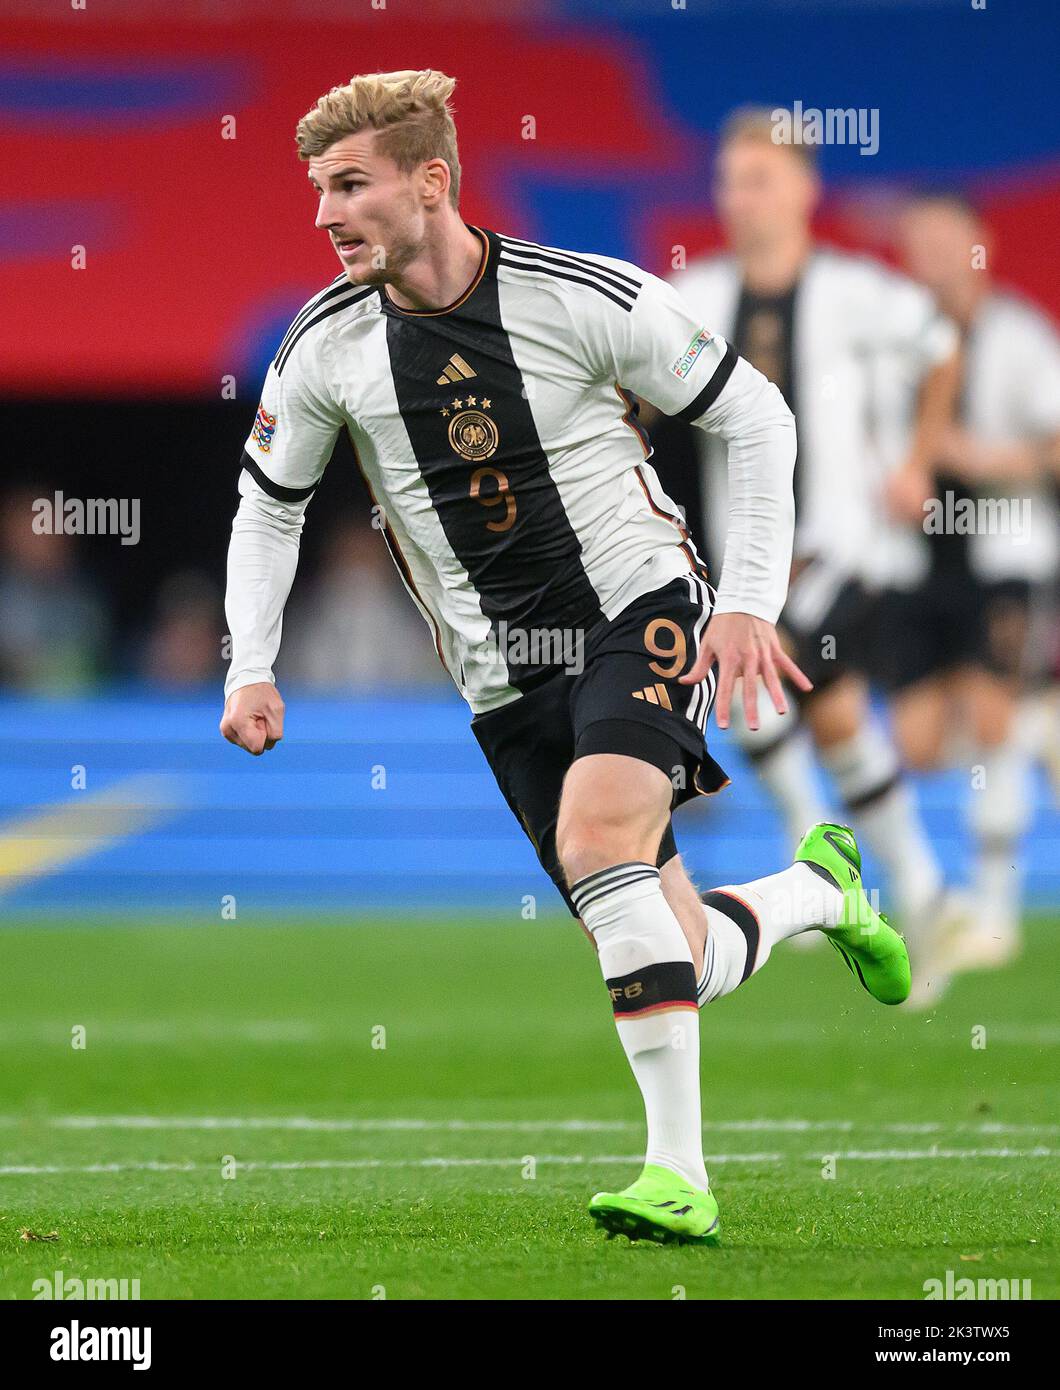 26 Sep 2022 - England v Germany - UEFA Nations League - League A - Group 3 - Wembley Stadium  Germany's Timo Werner during the UEFA Nations League match against England. Picture : Mark Pain / Alamy Live News Stock Photo